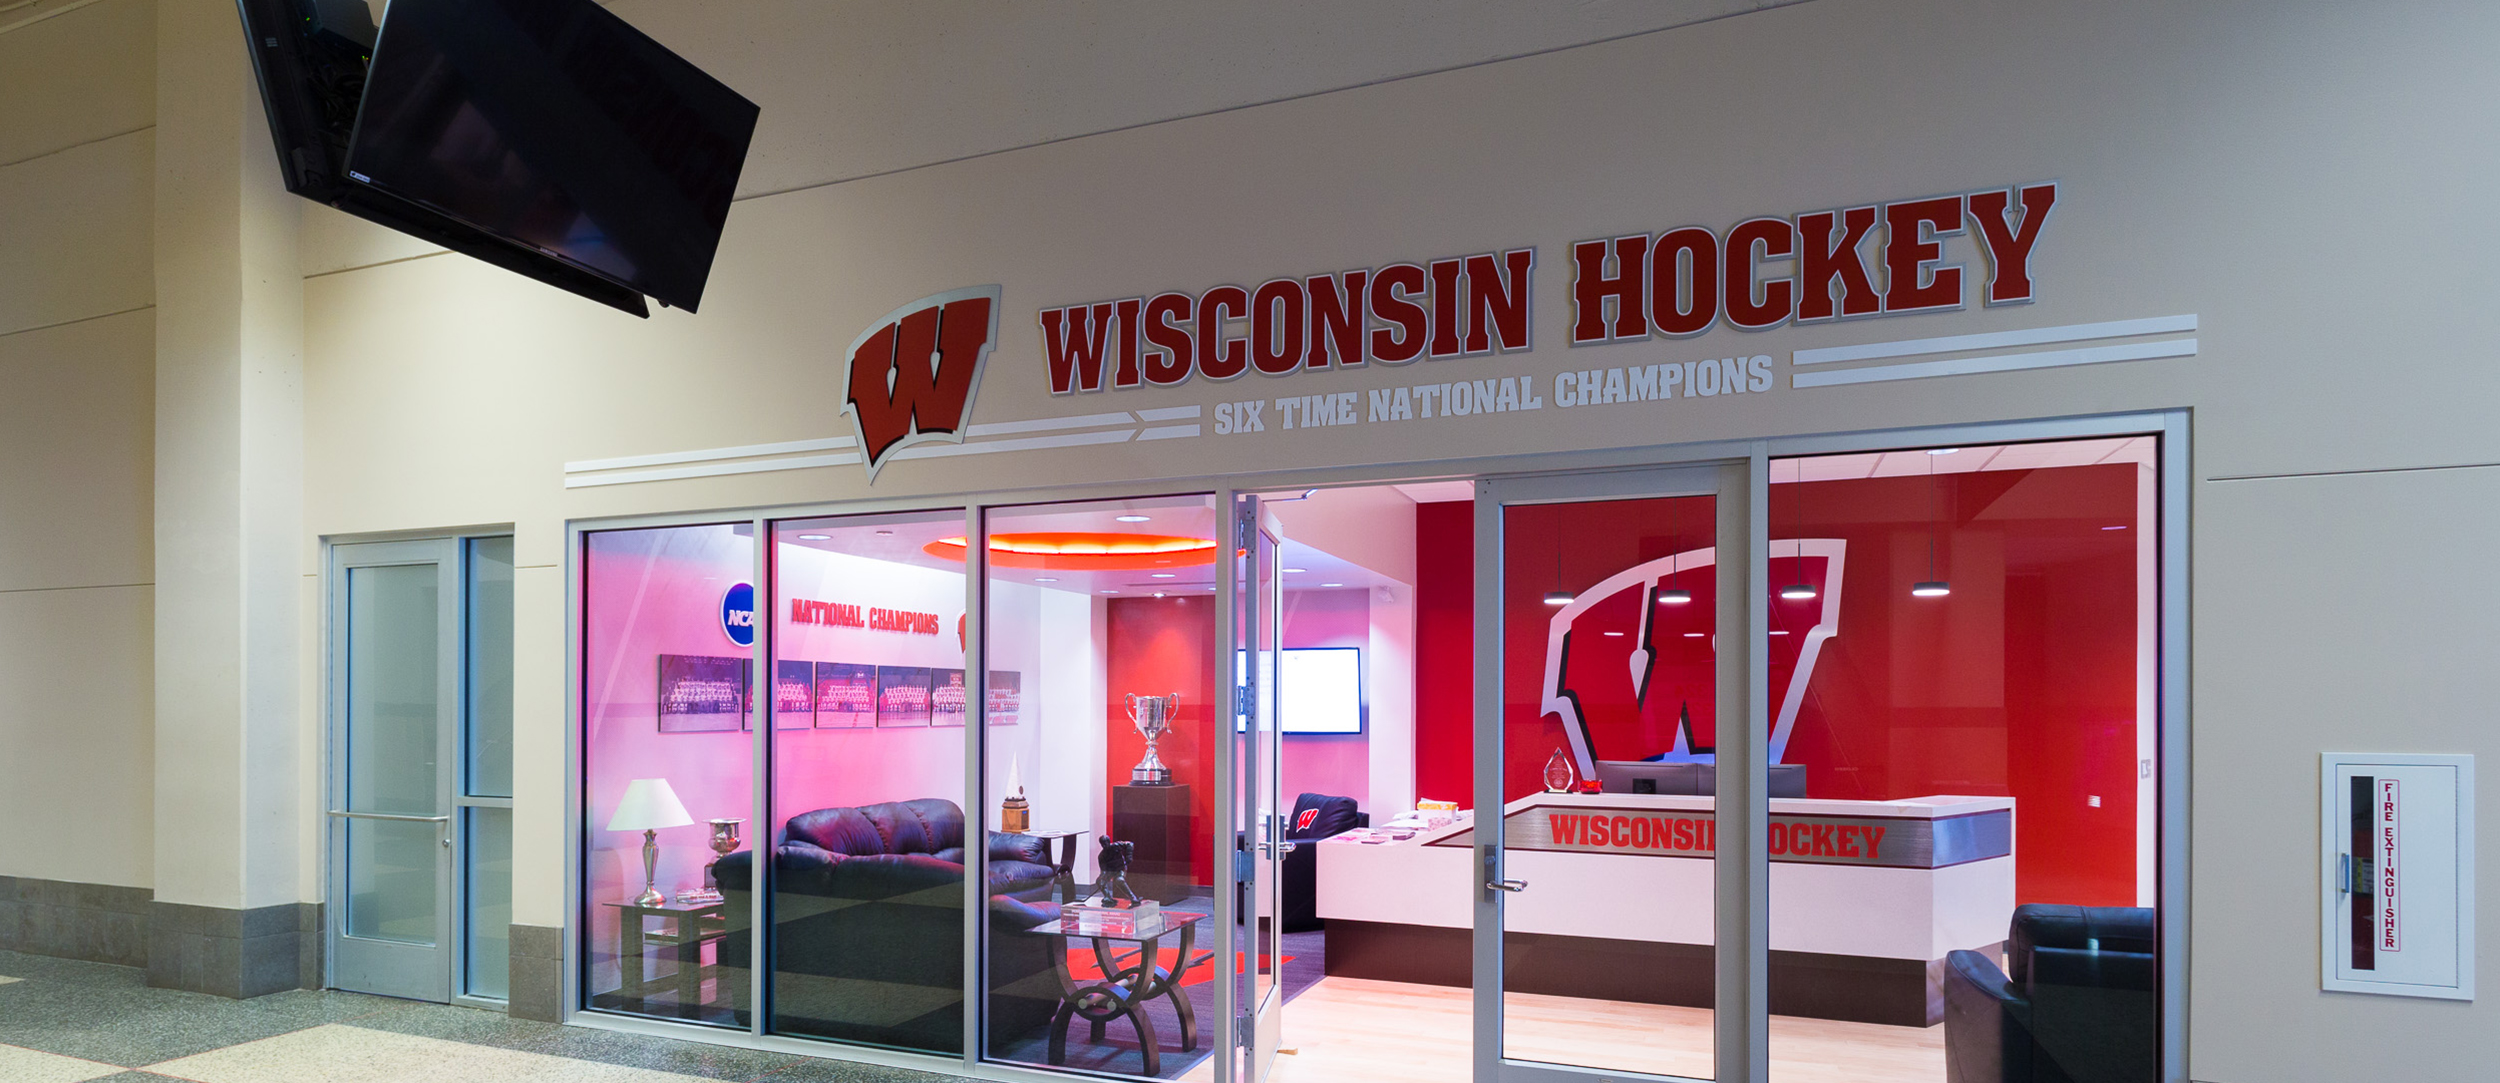 University of Wisconsin - Hockey Offices Entrance Dimensional Lettering